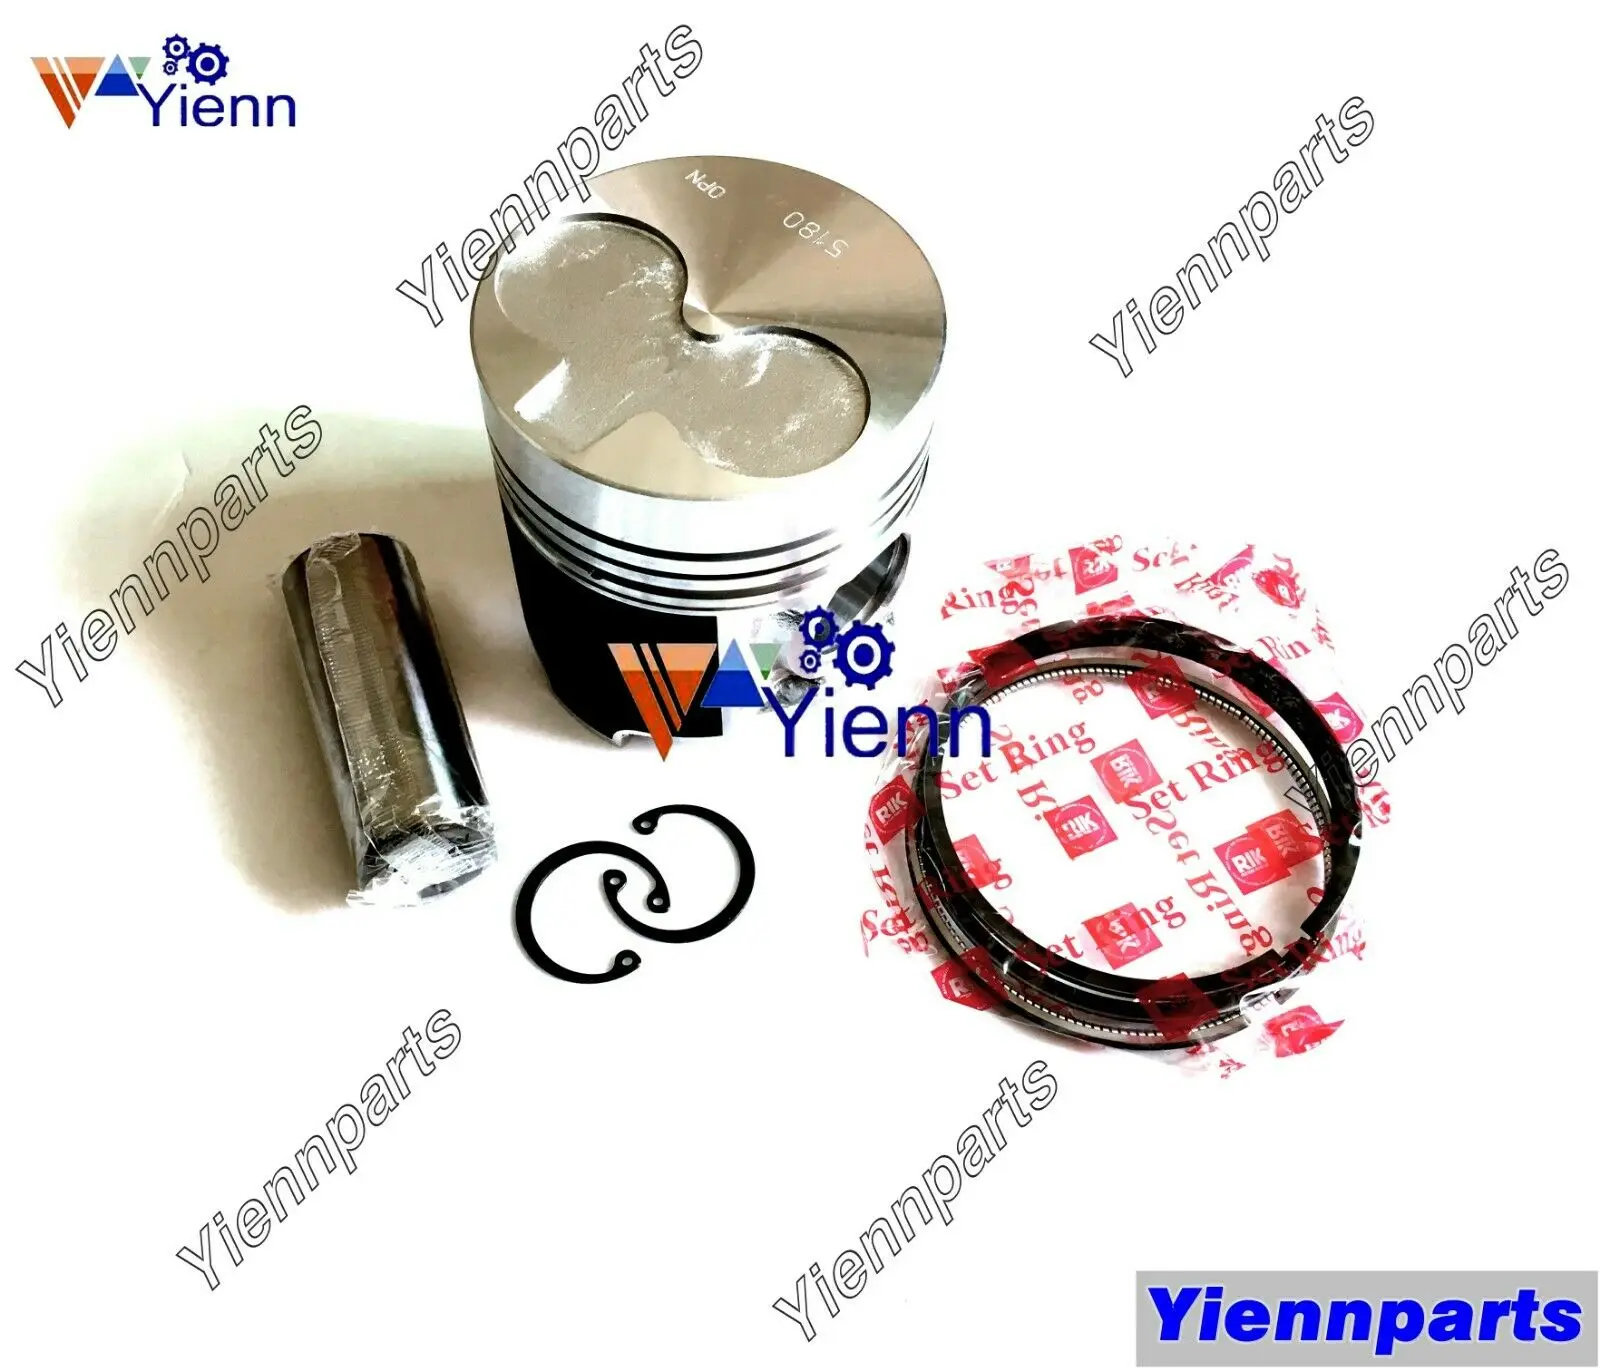 

For Perkins N843 N843L-T N843T N843L N843-C N843-D Piston + Piston Ring Set Case-IH TRACTOR D33 DX31 DX33 Farmall 31 Engine